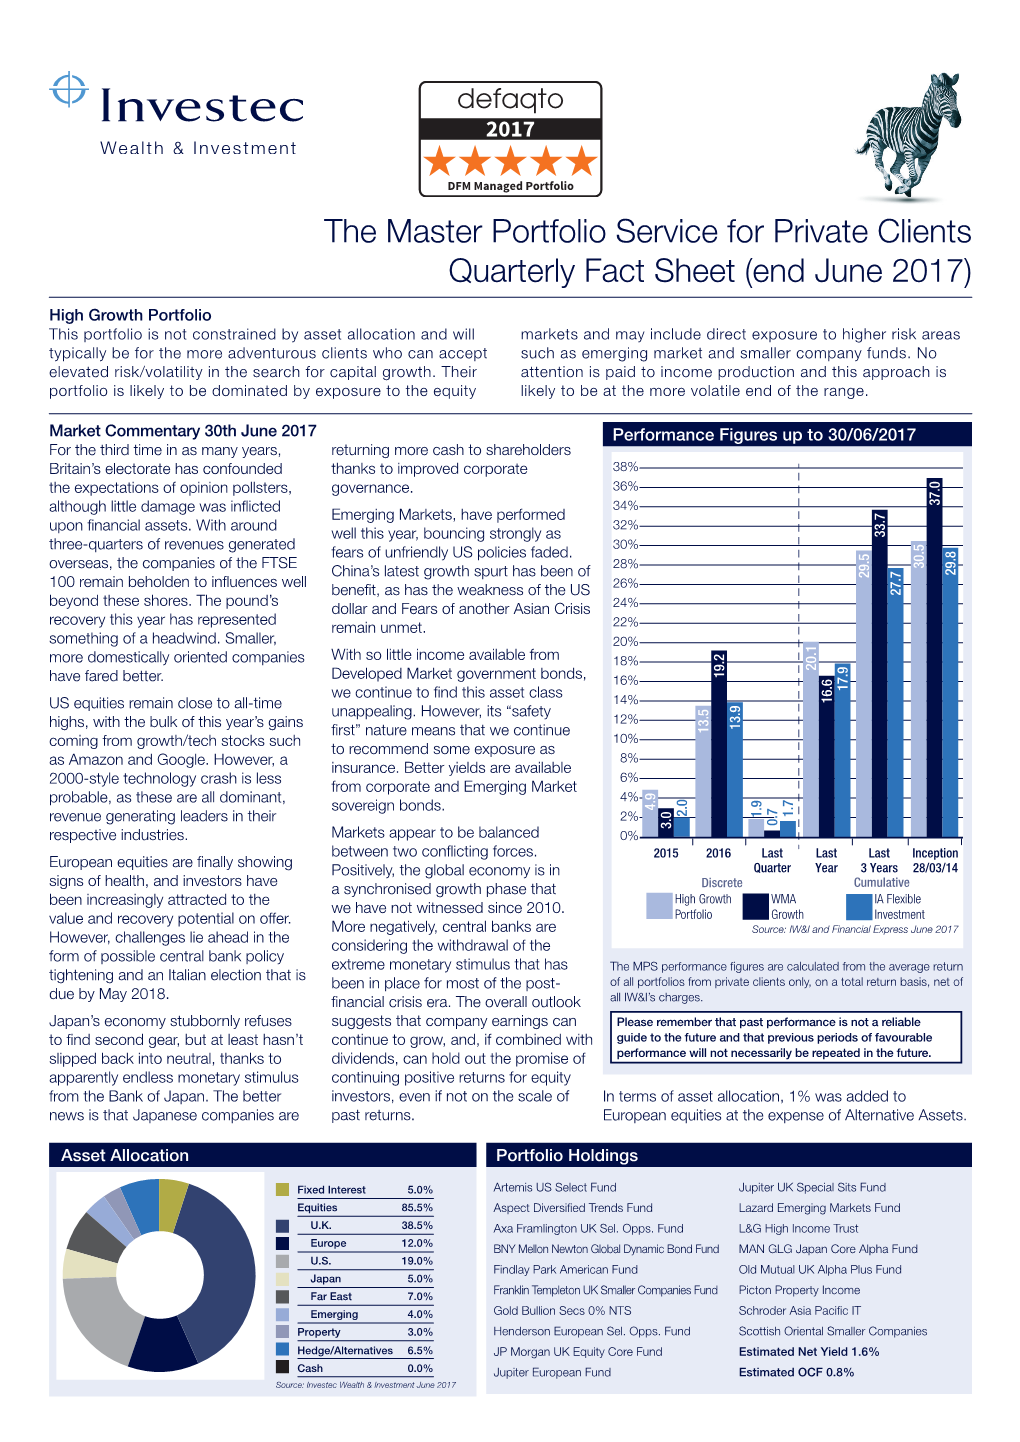 The Master Portfolio Service for Private Clients Quarterly Fact Sheet (End June 2017)